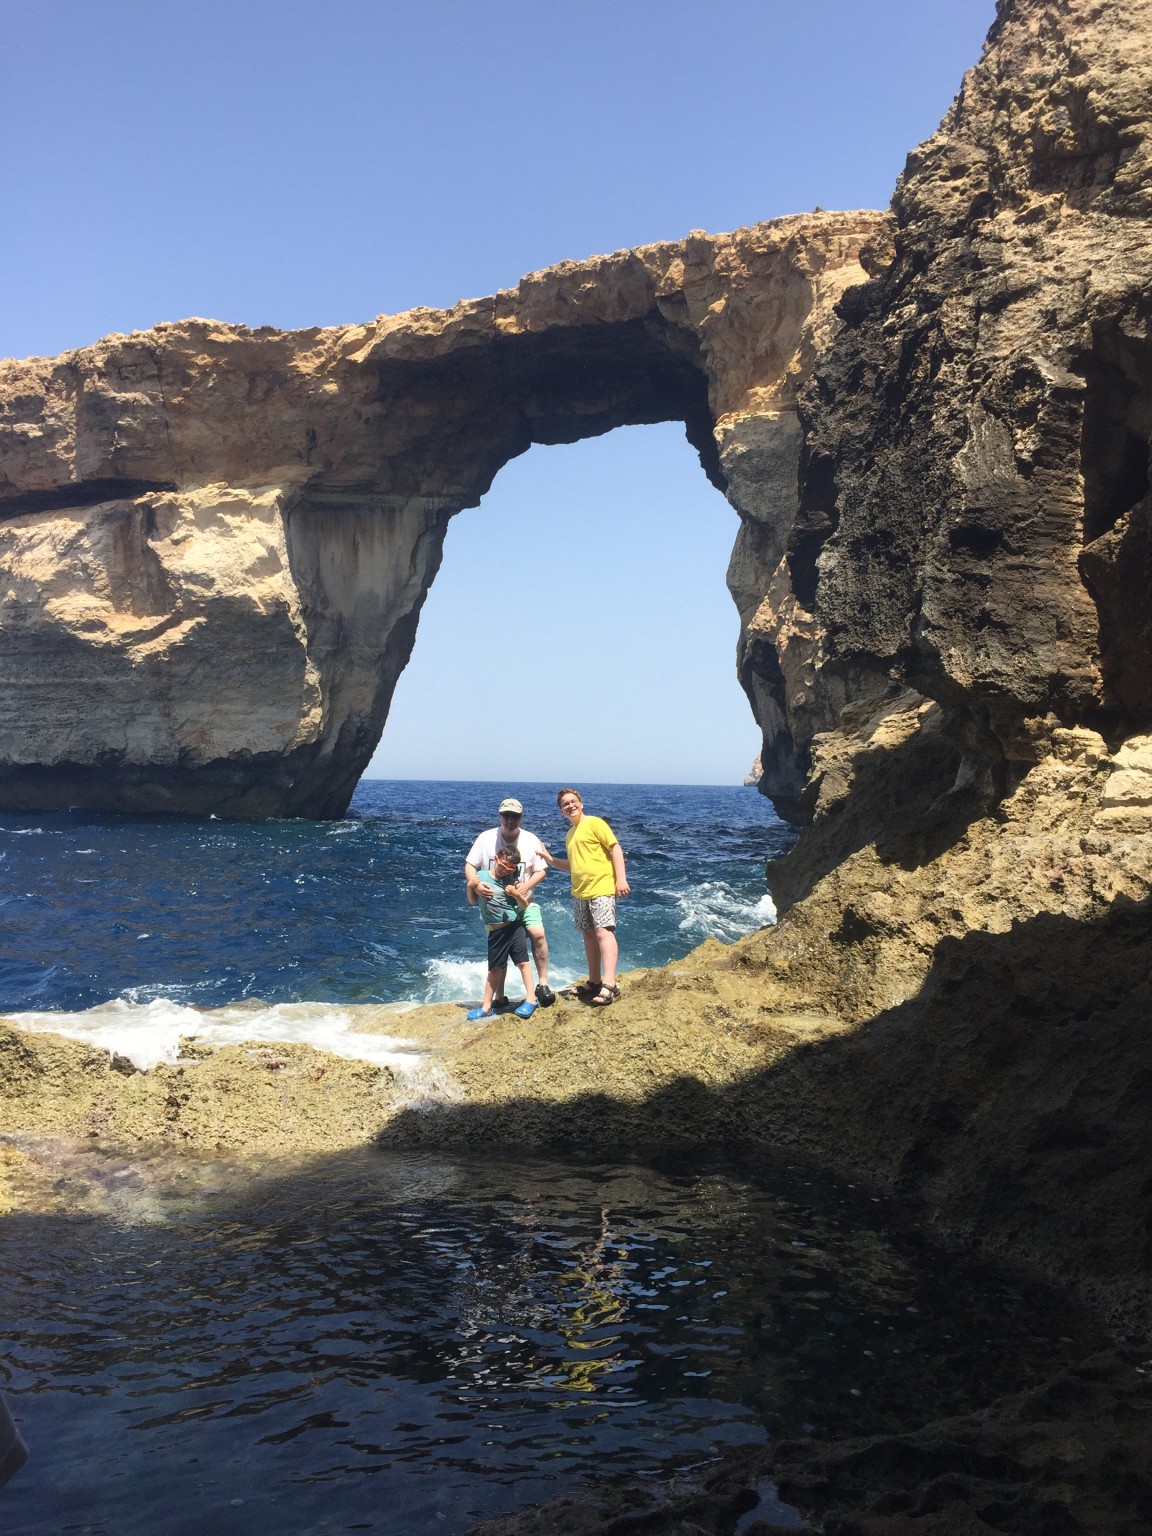 Azure window or venue for the Dothraki wedding deepening on whether or not you think winter is coming.